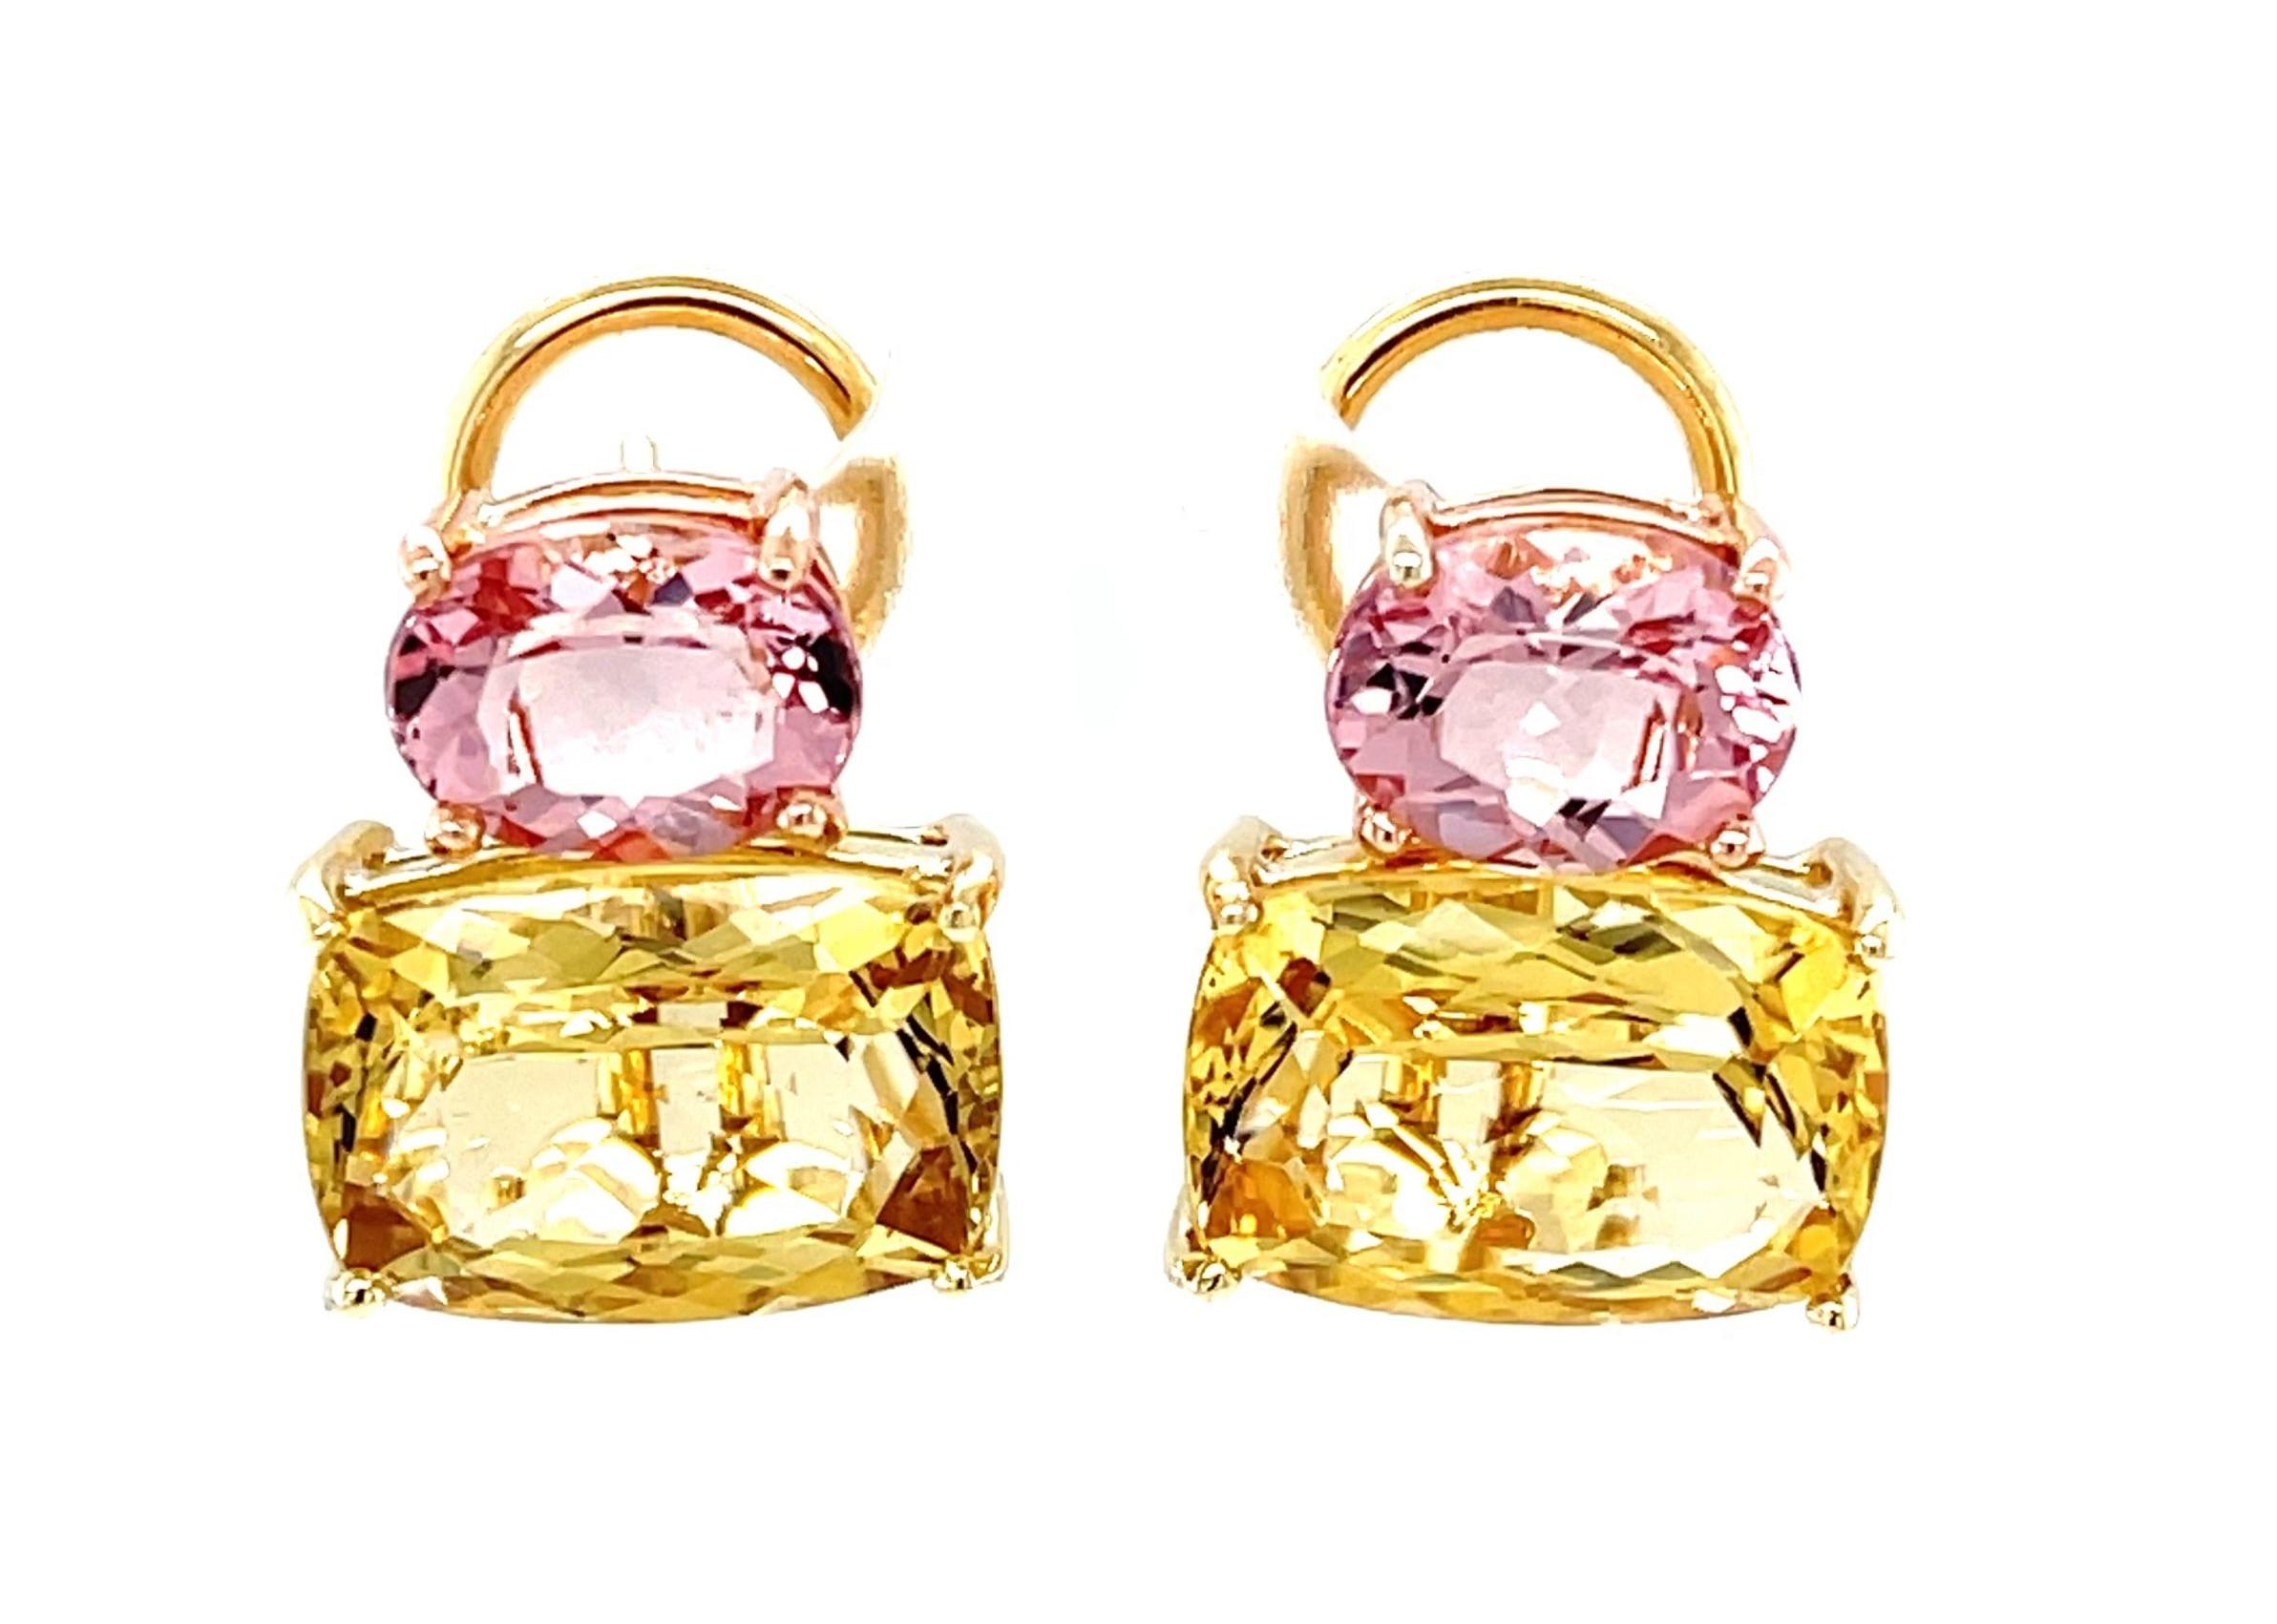 These one-of-a-kind gemstone earrings feature a unique pairing of bright golden beryl and sparking pink morganite set in 18k yellow and rose gold! These unusual gems are colorful varieties of the mineral beryl, whose blue variety is the well-known